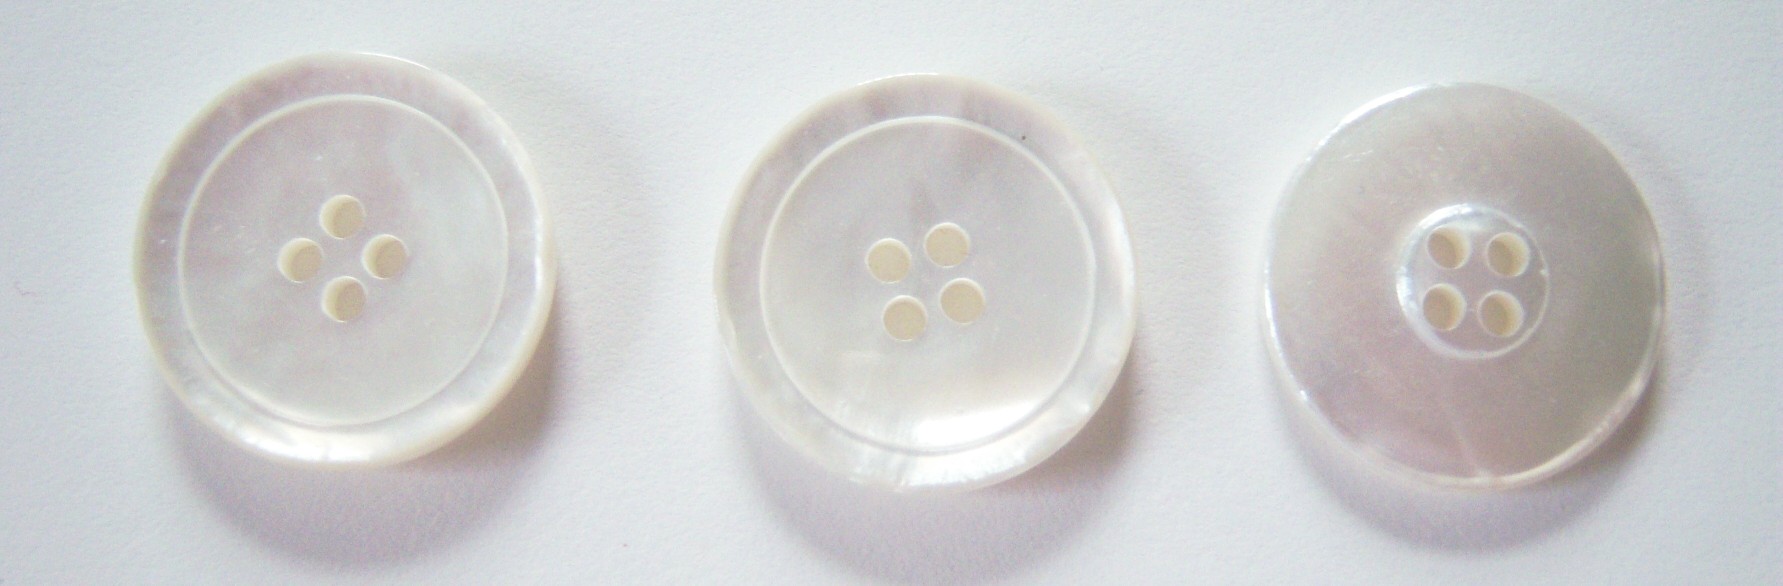 White 1"Pearlized 4 Hole Button